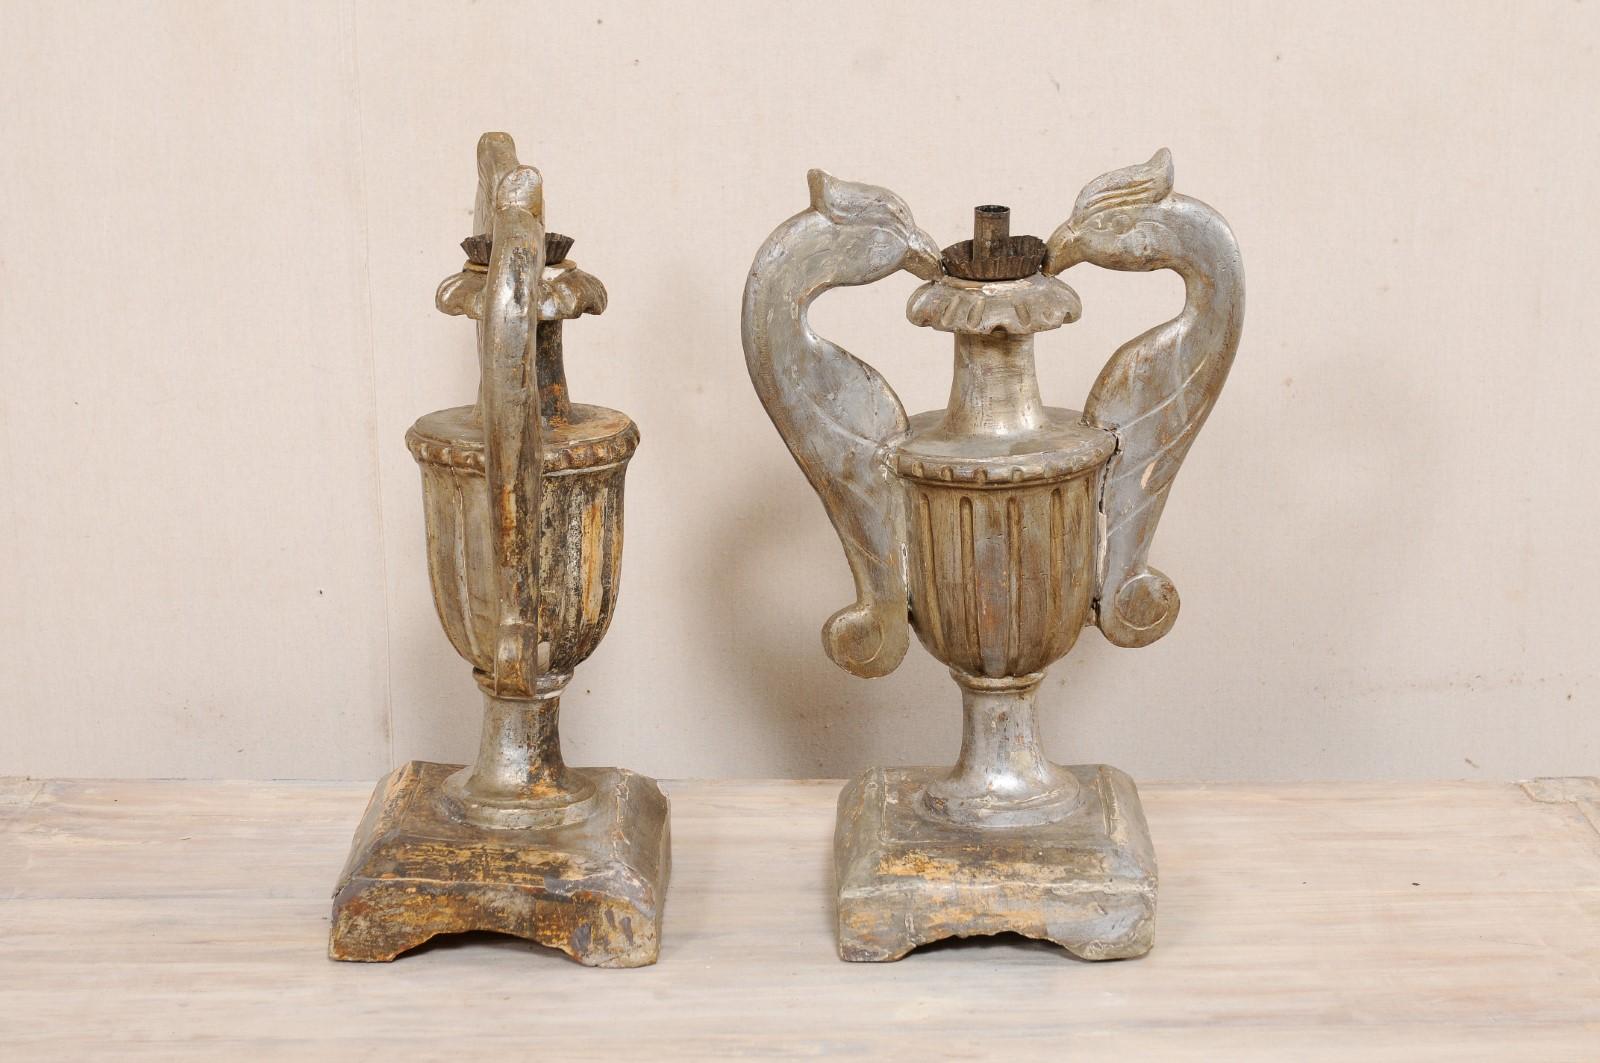 Italian Pair of Wood Candle Lamp Urns with Carved Bird Handles, 19th Century For Sale 5